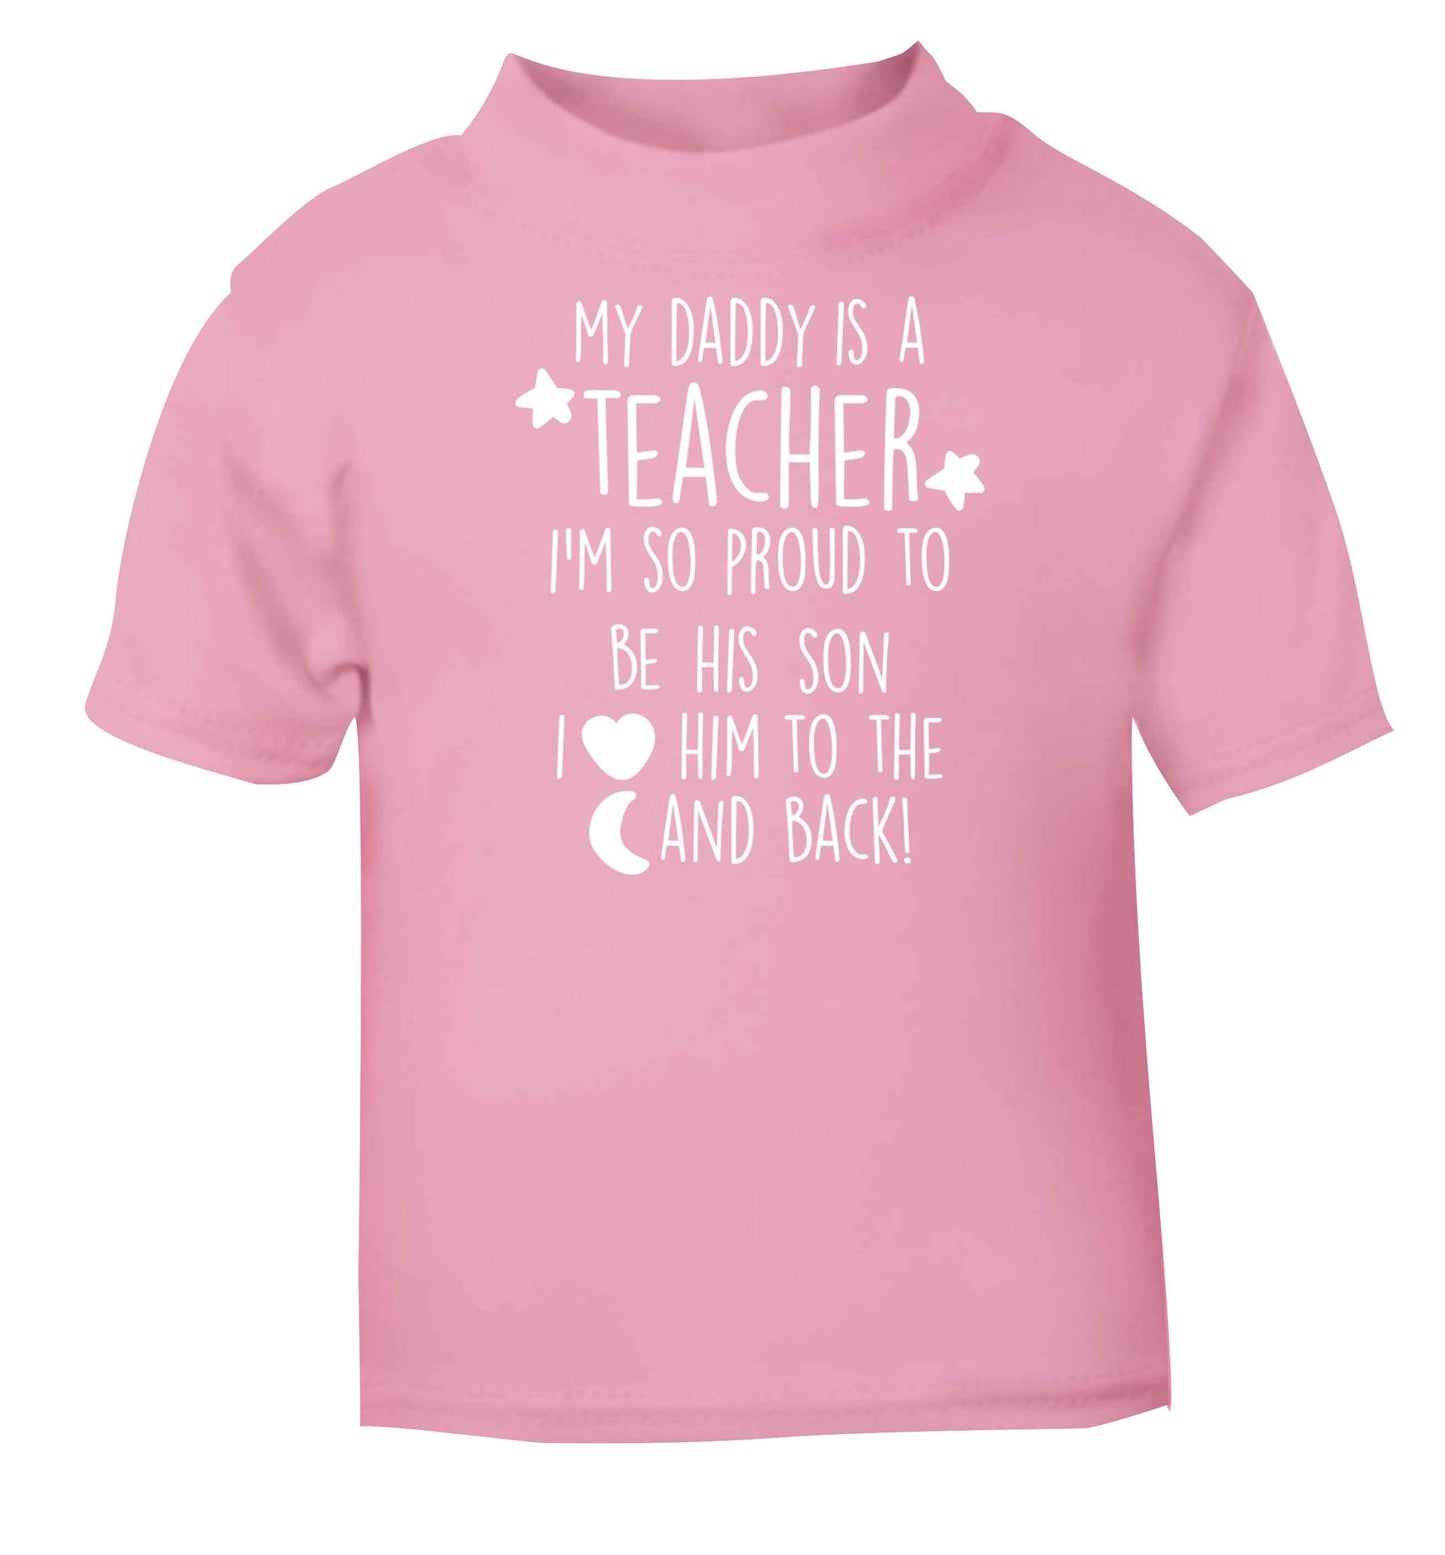 My daddy is a teacher I'm so proud to be his son I love her to the moon and back light pink baby toddler Tshirt 2 Years